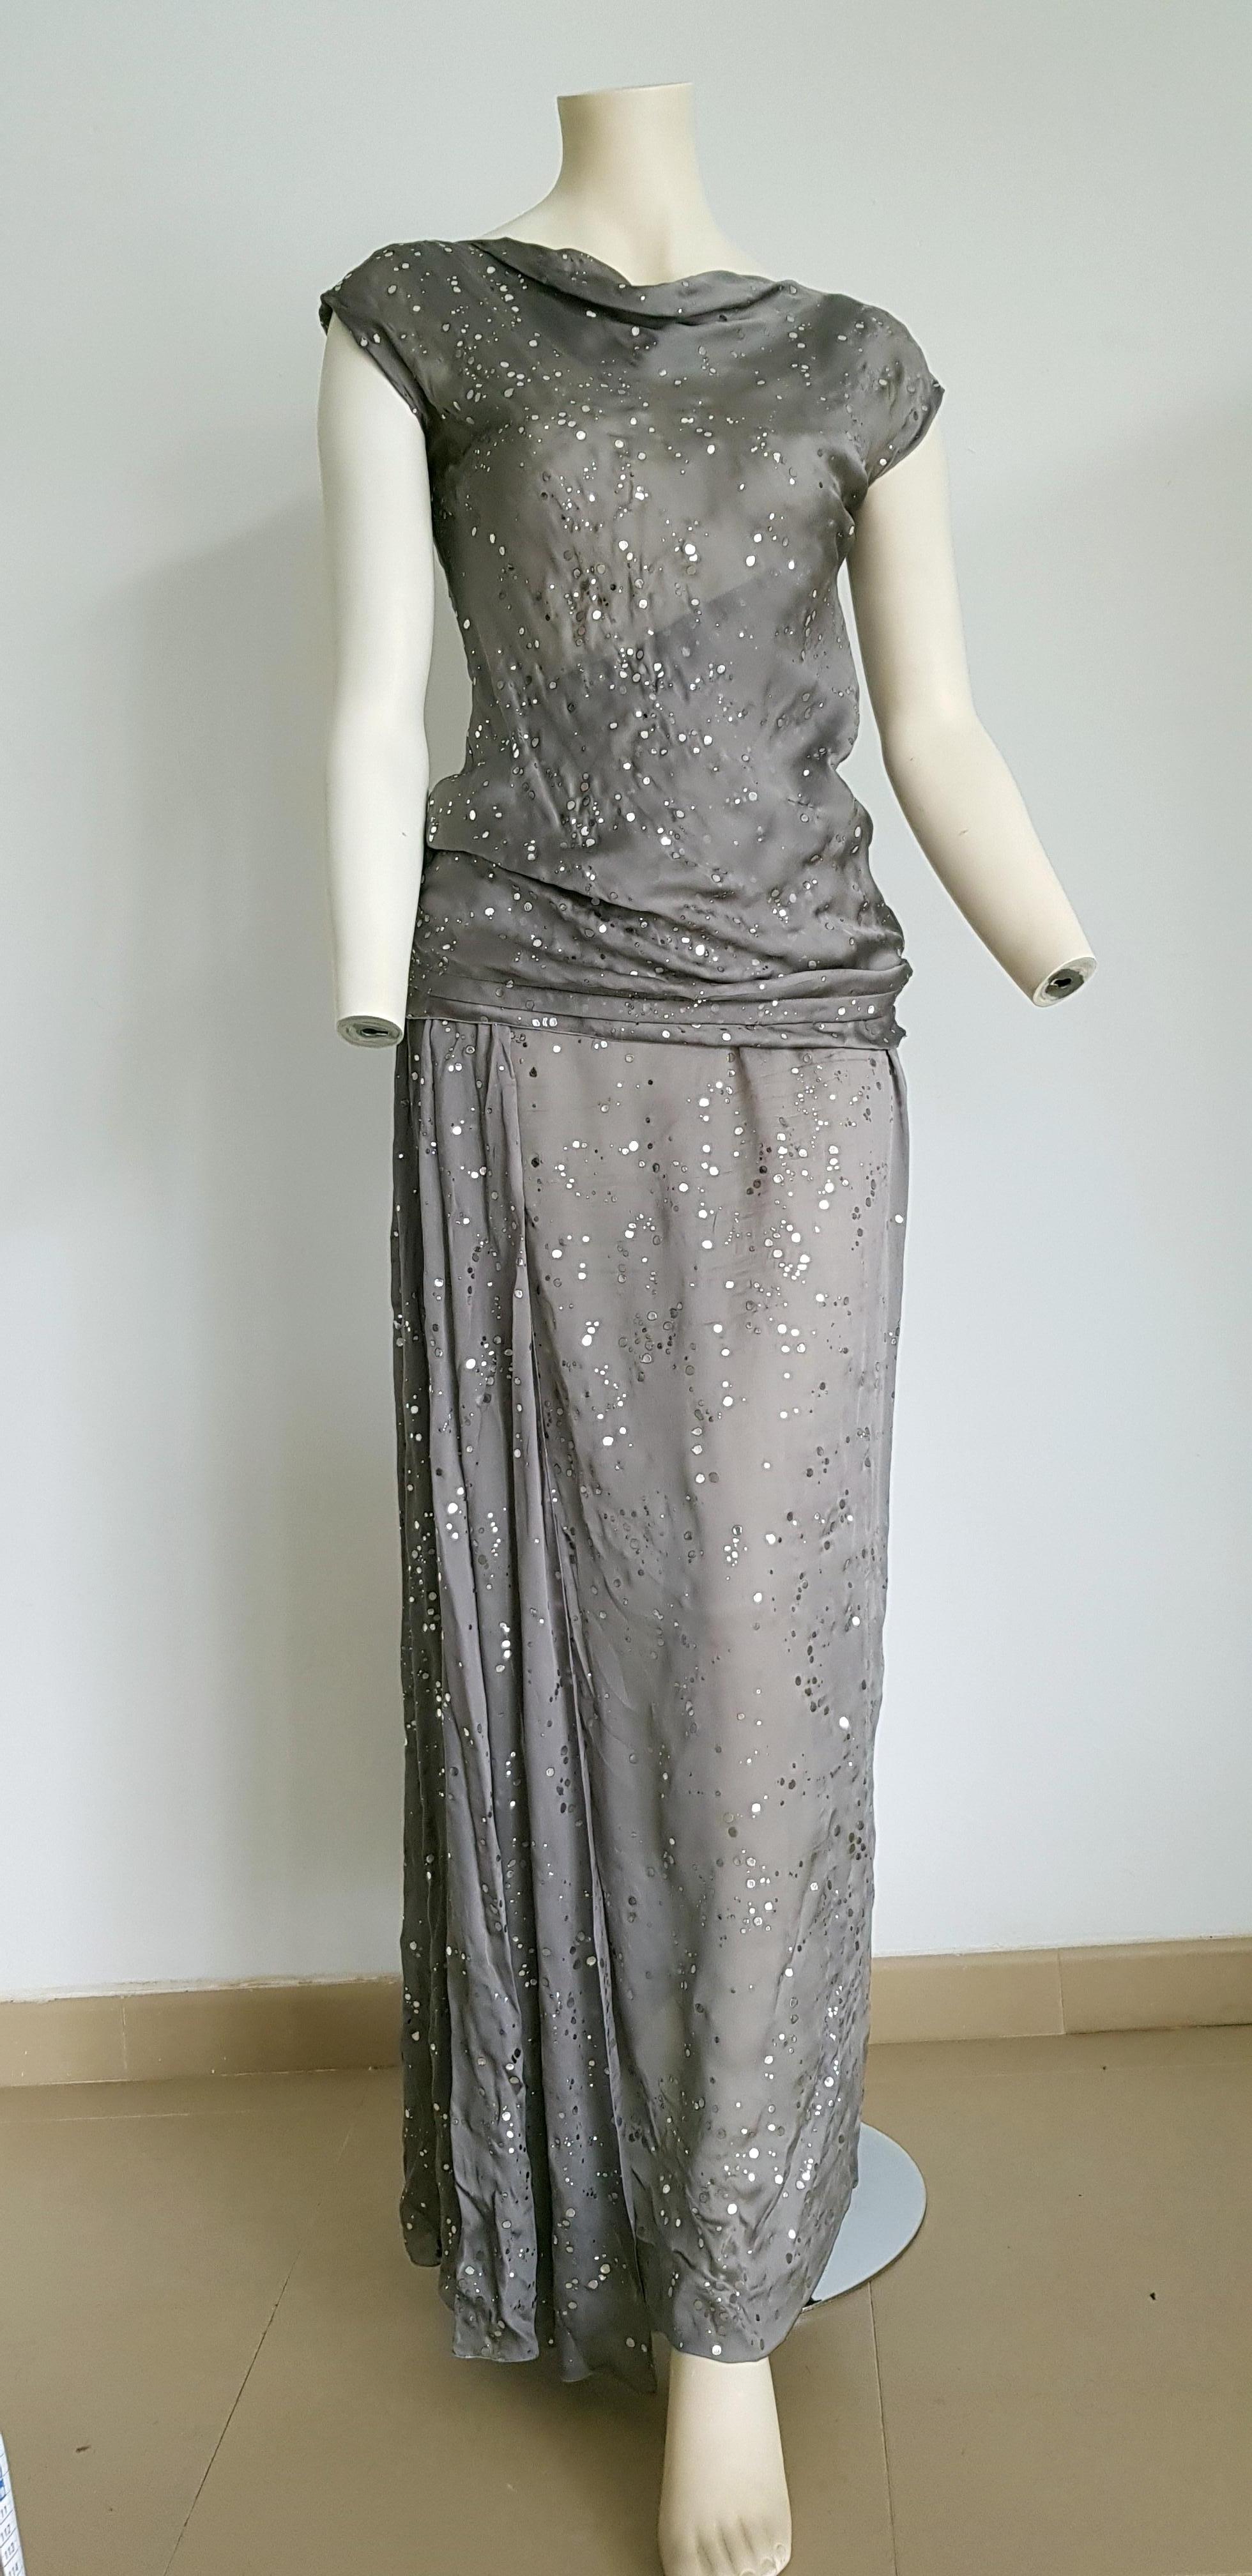 CHANEL Haute Couture, fabric with bright silver application, top with a single shoulder strap, and blouse and skirt. All silk. Gown evening dress - Unworn, New.

SIZE: equivalent to about Small / Medium, please review approx measurements as follows